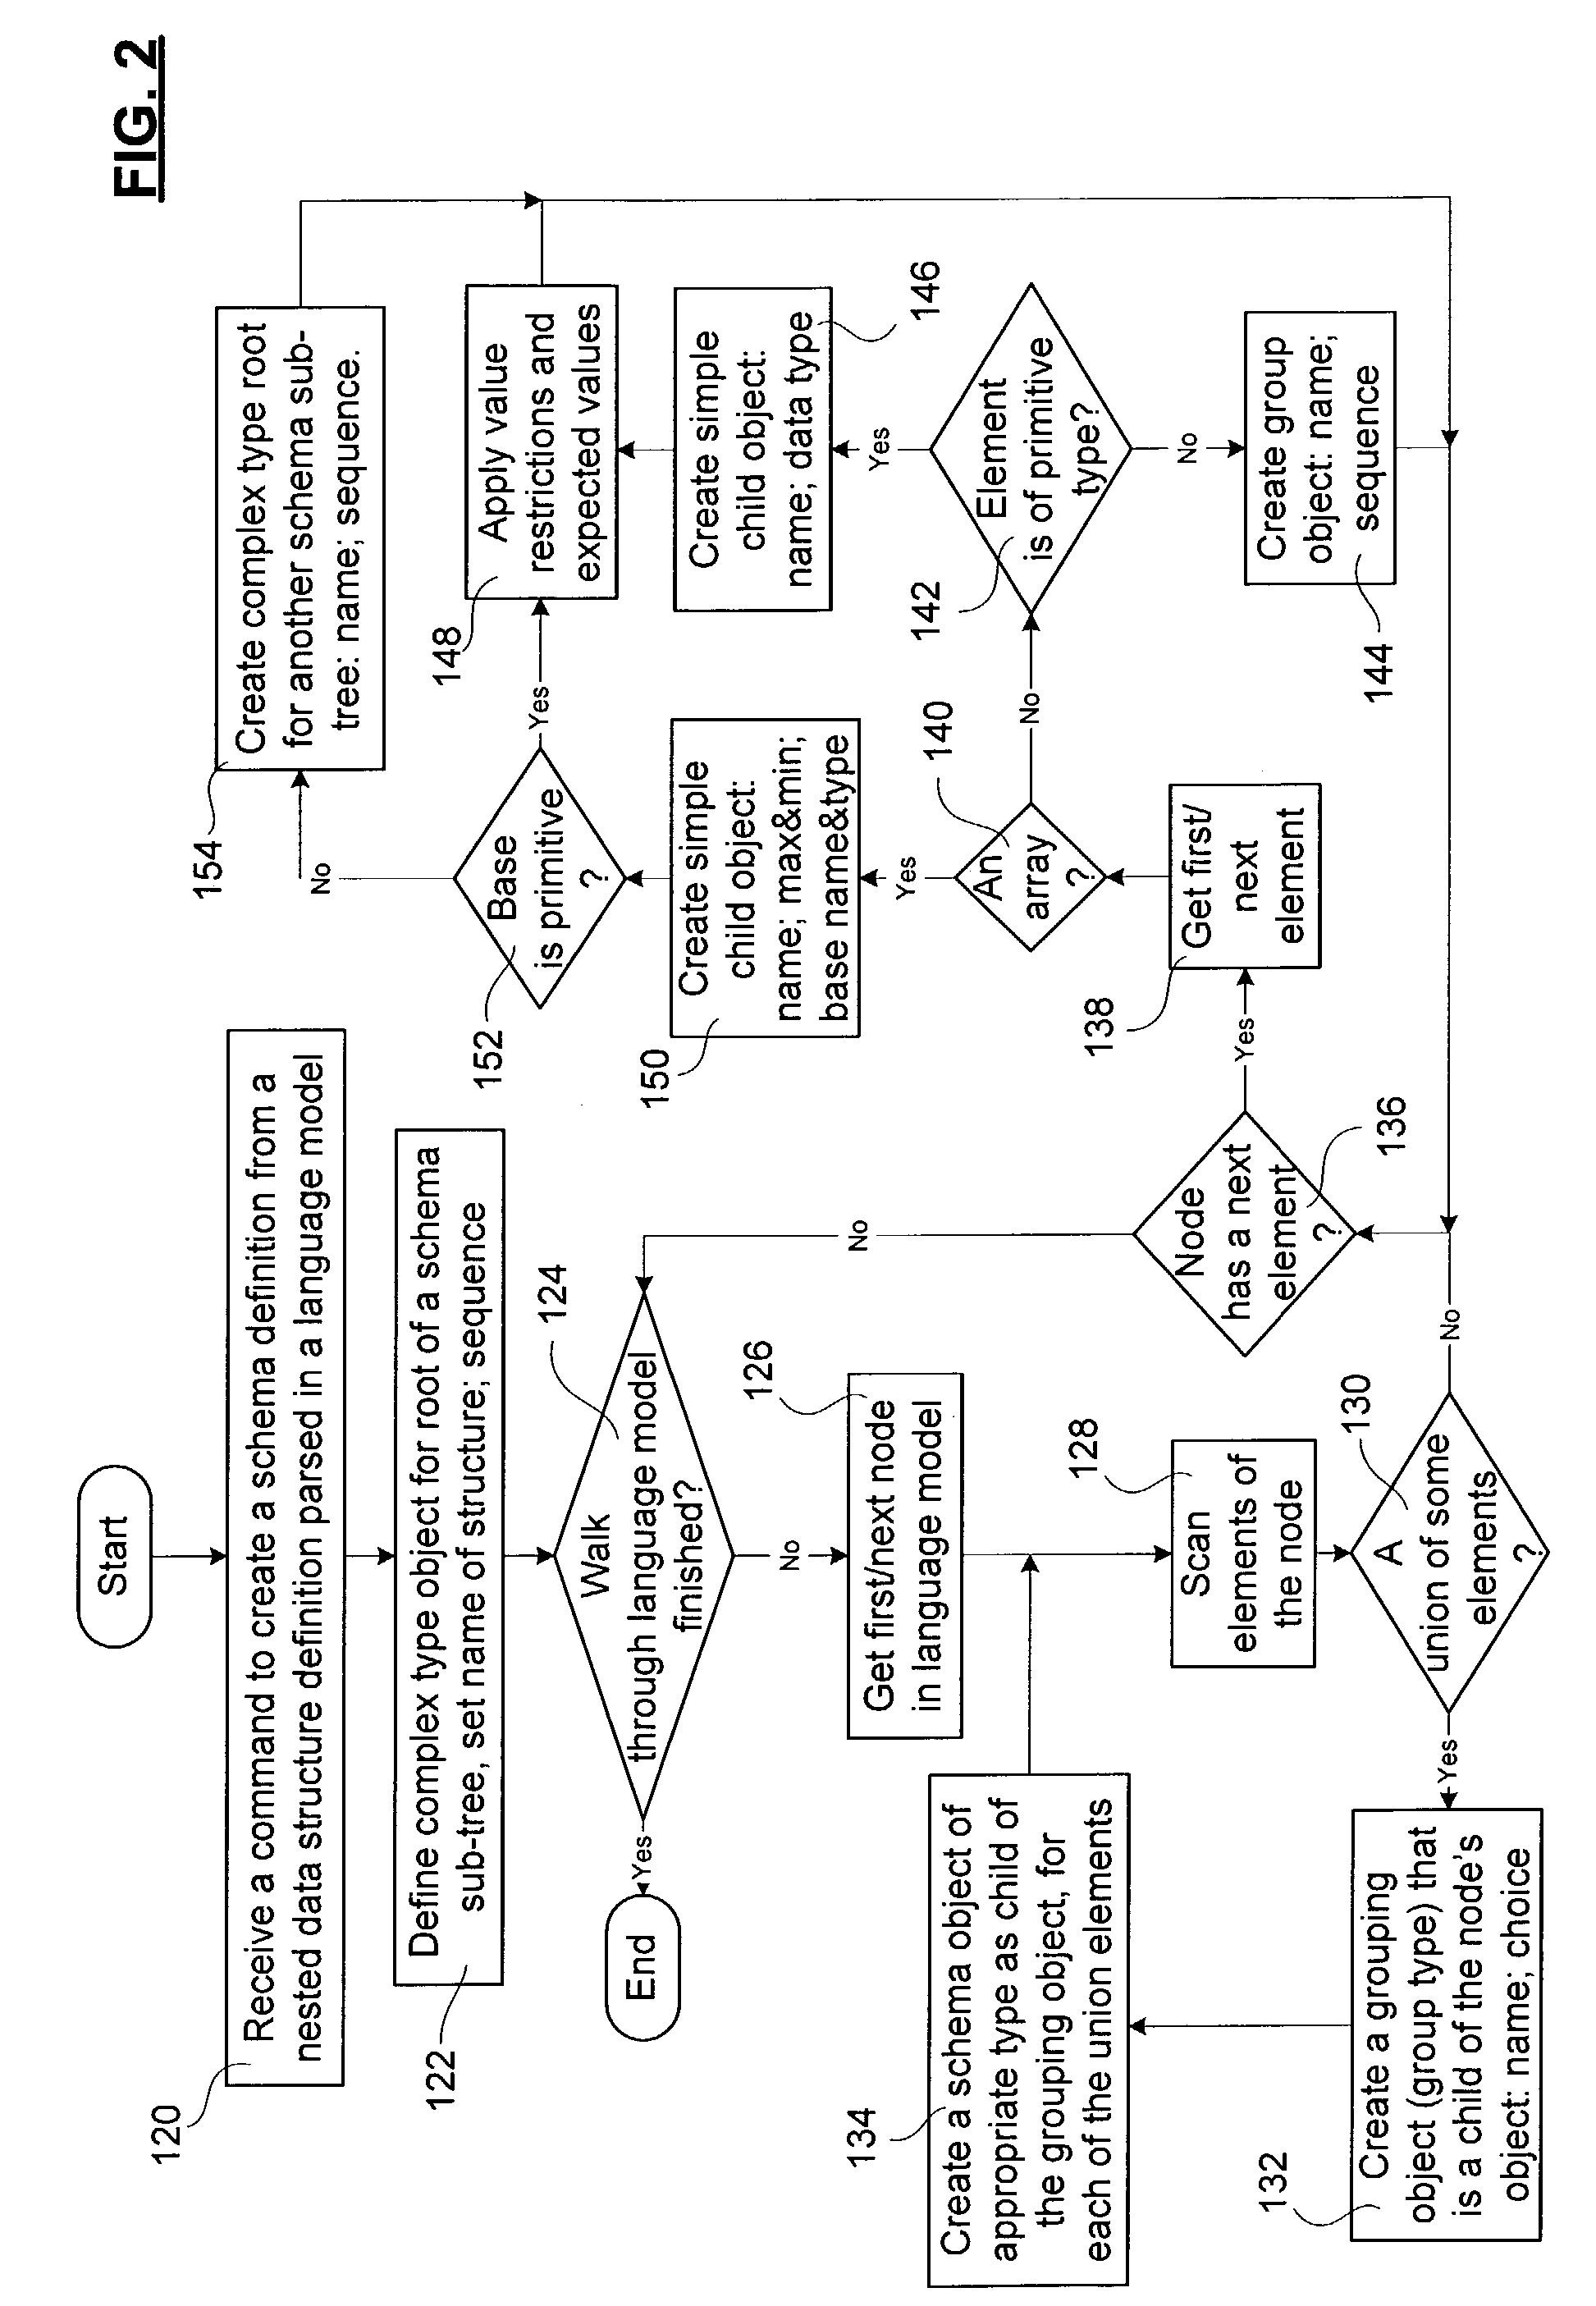 Method and apparatus for converting legacy programming language data structures to schema definitions